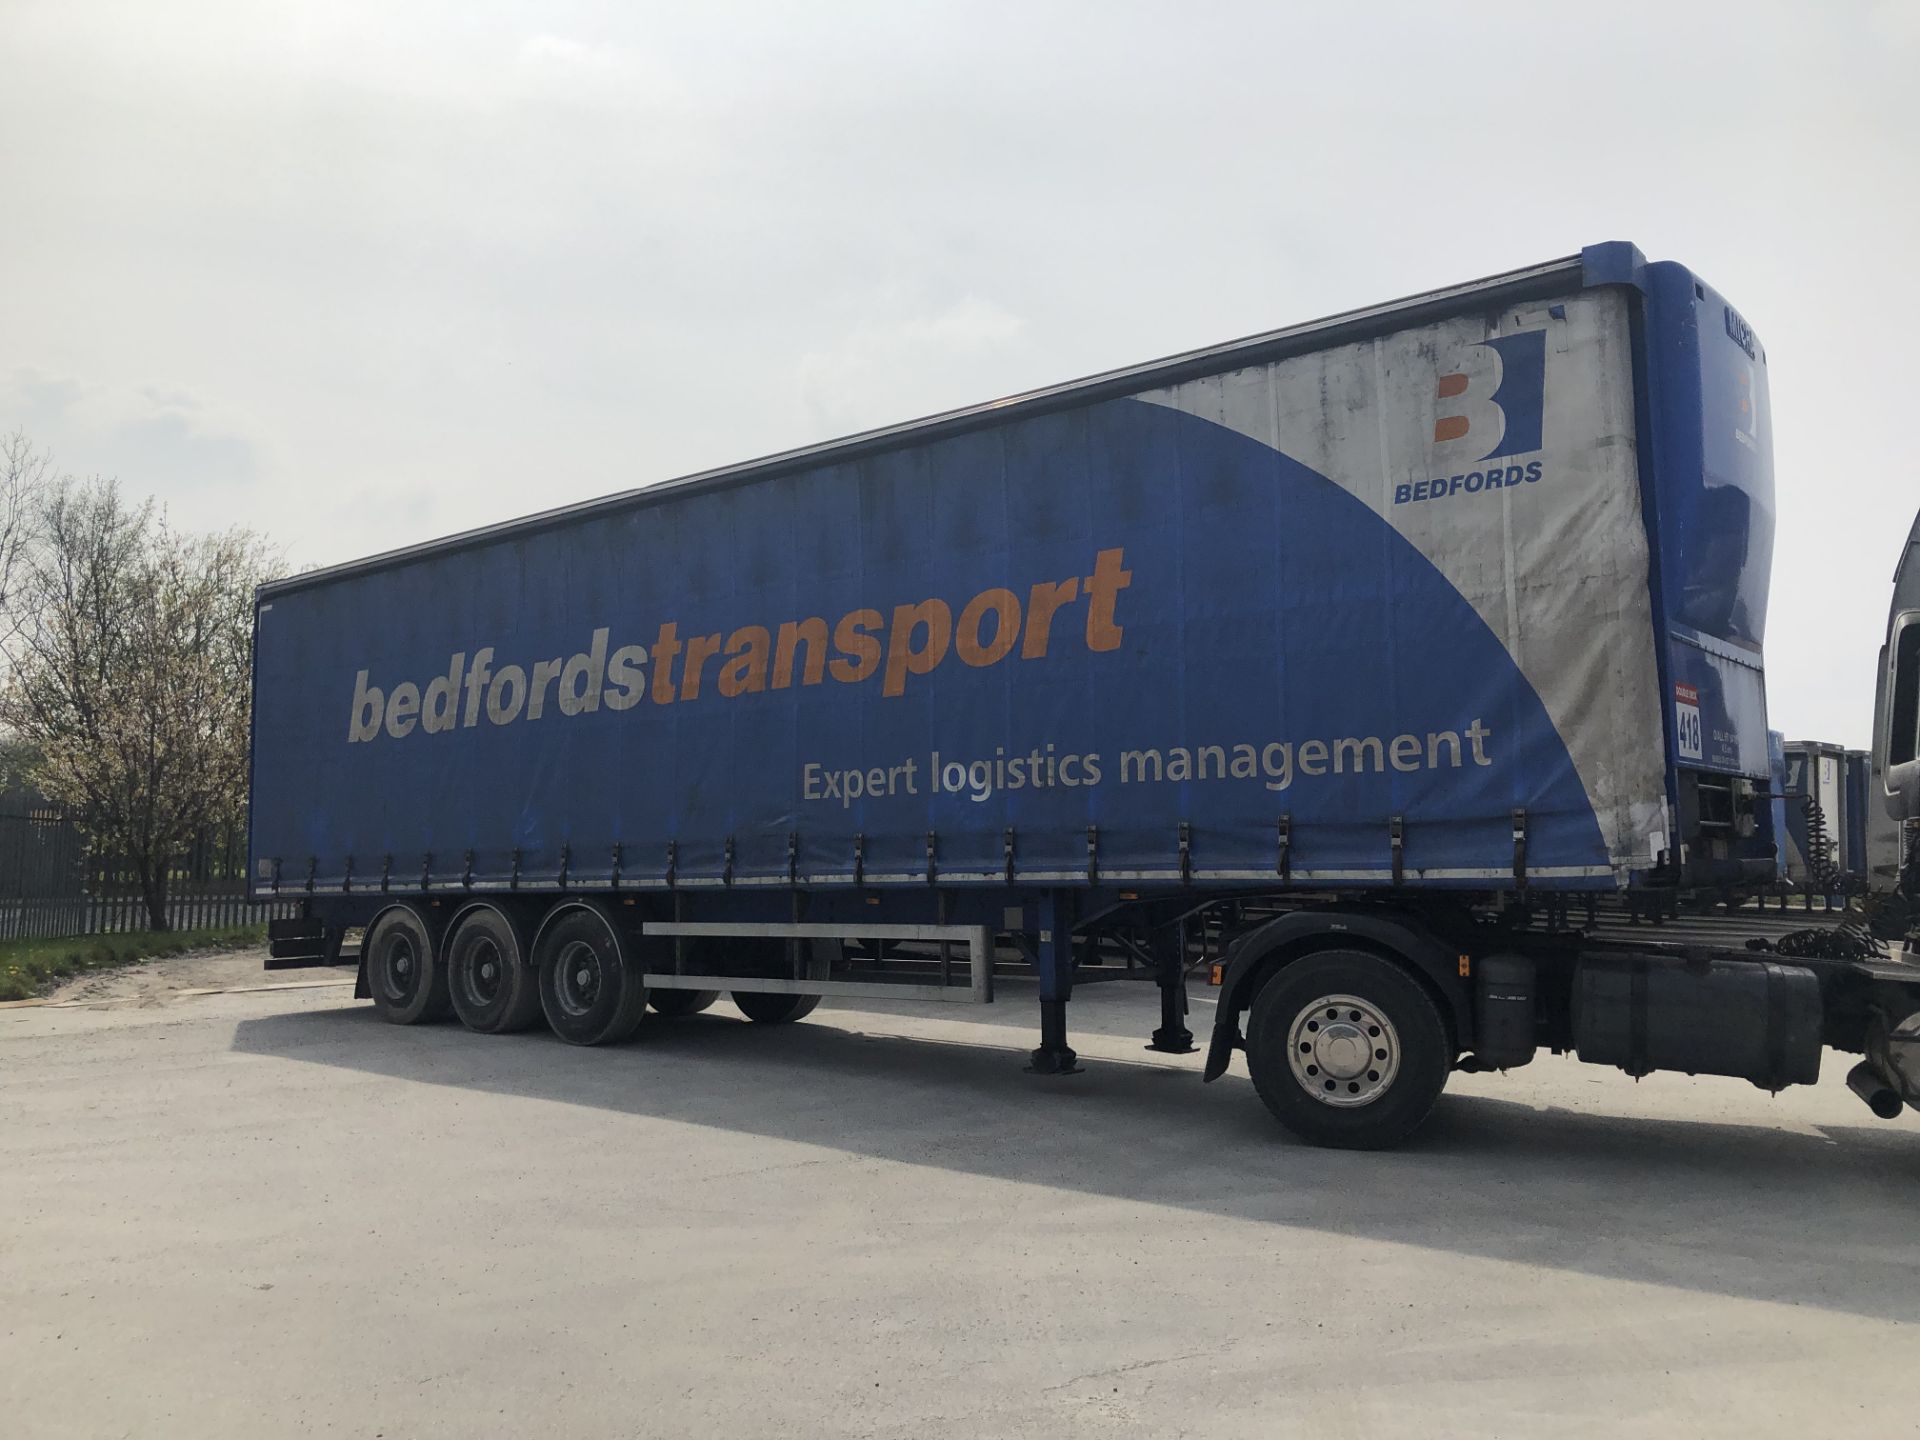 SDC 13.6m Tri-Axle Curtainside Double Deck Semi-Trailer, chassis no. 113832, ID no. C319146, year of